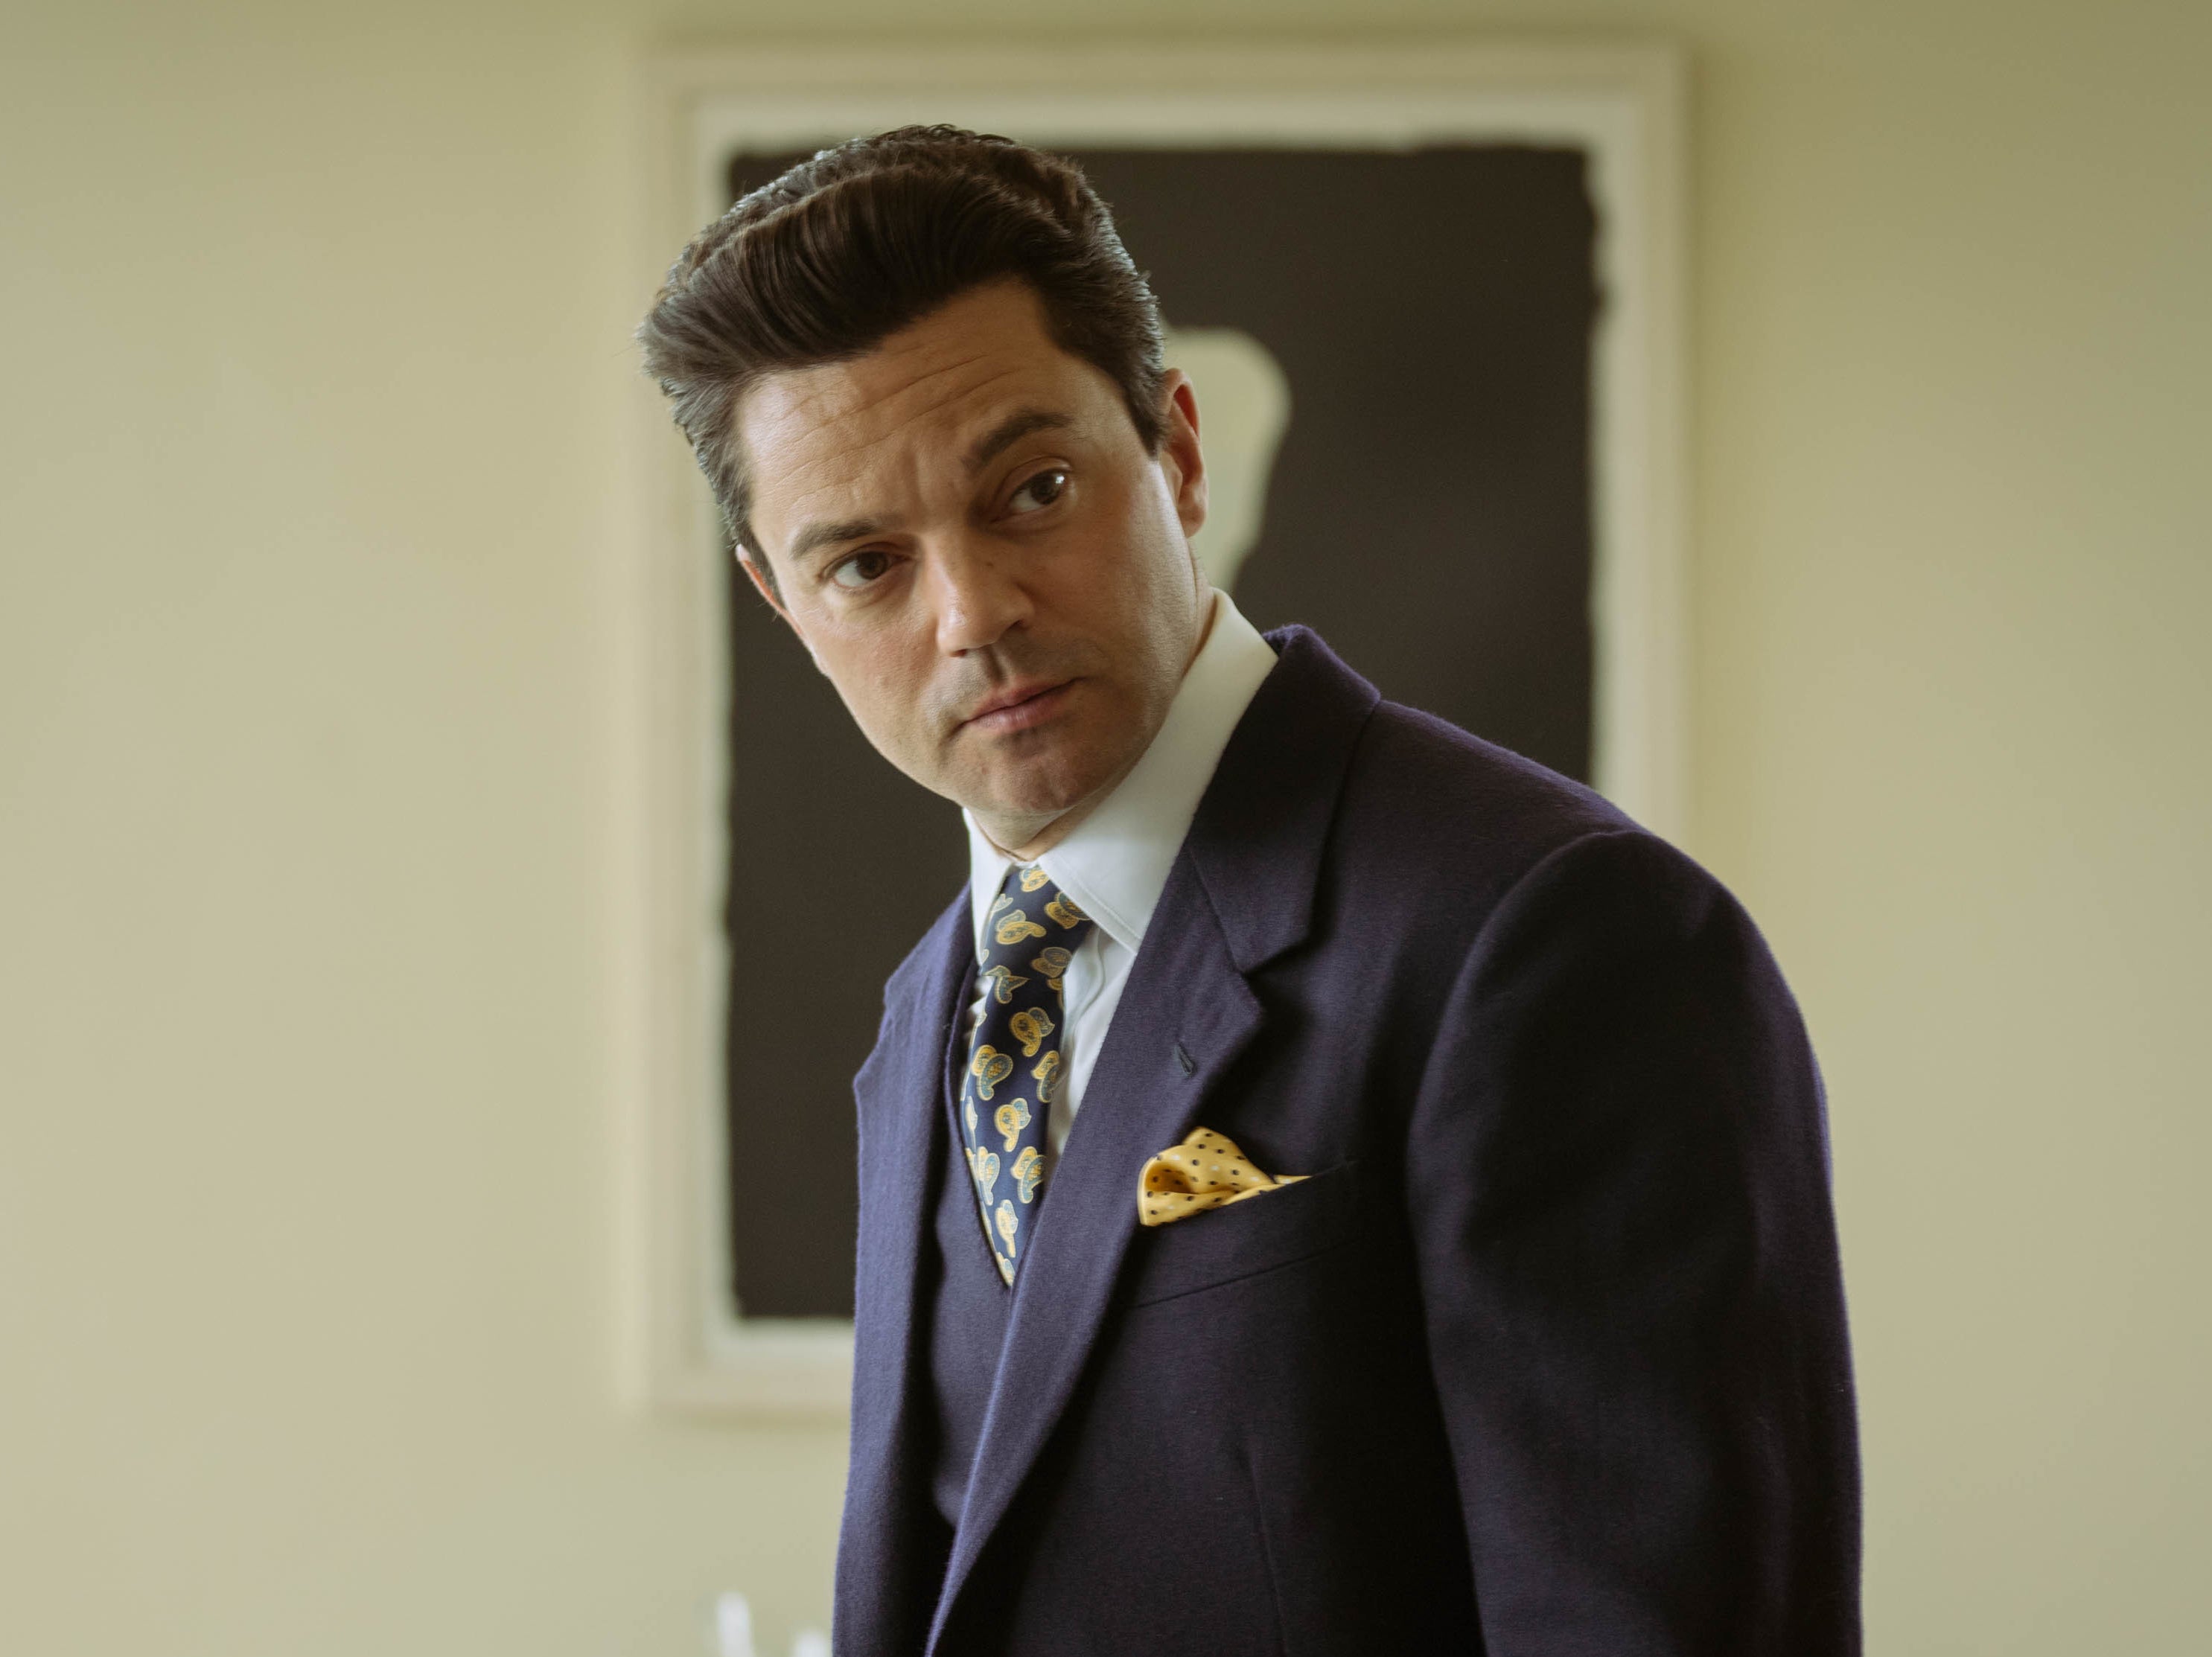 Dominic Cooper as Edwyn Cooper in ‘The Gold'